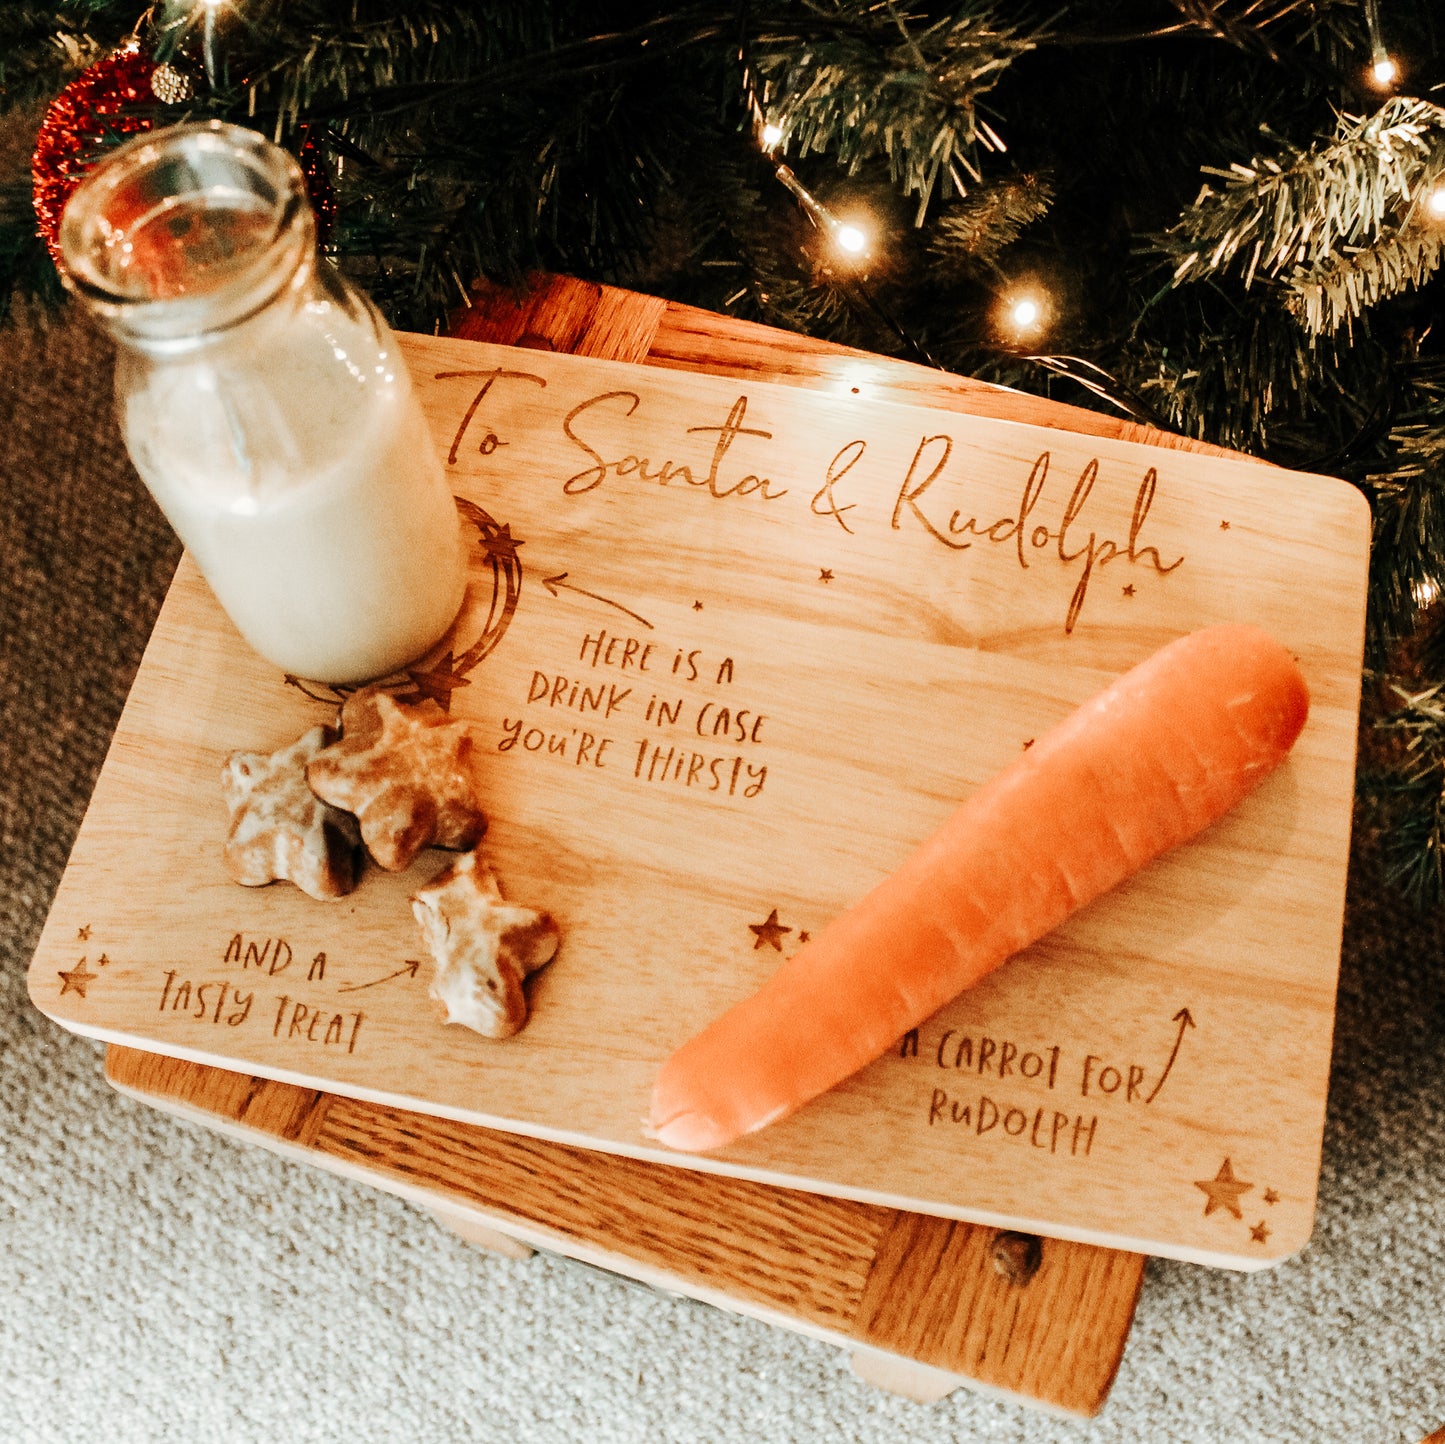 wooden engraved Santa Christmas eve board for milk and treats